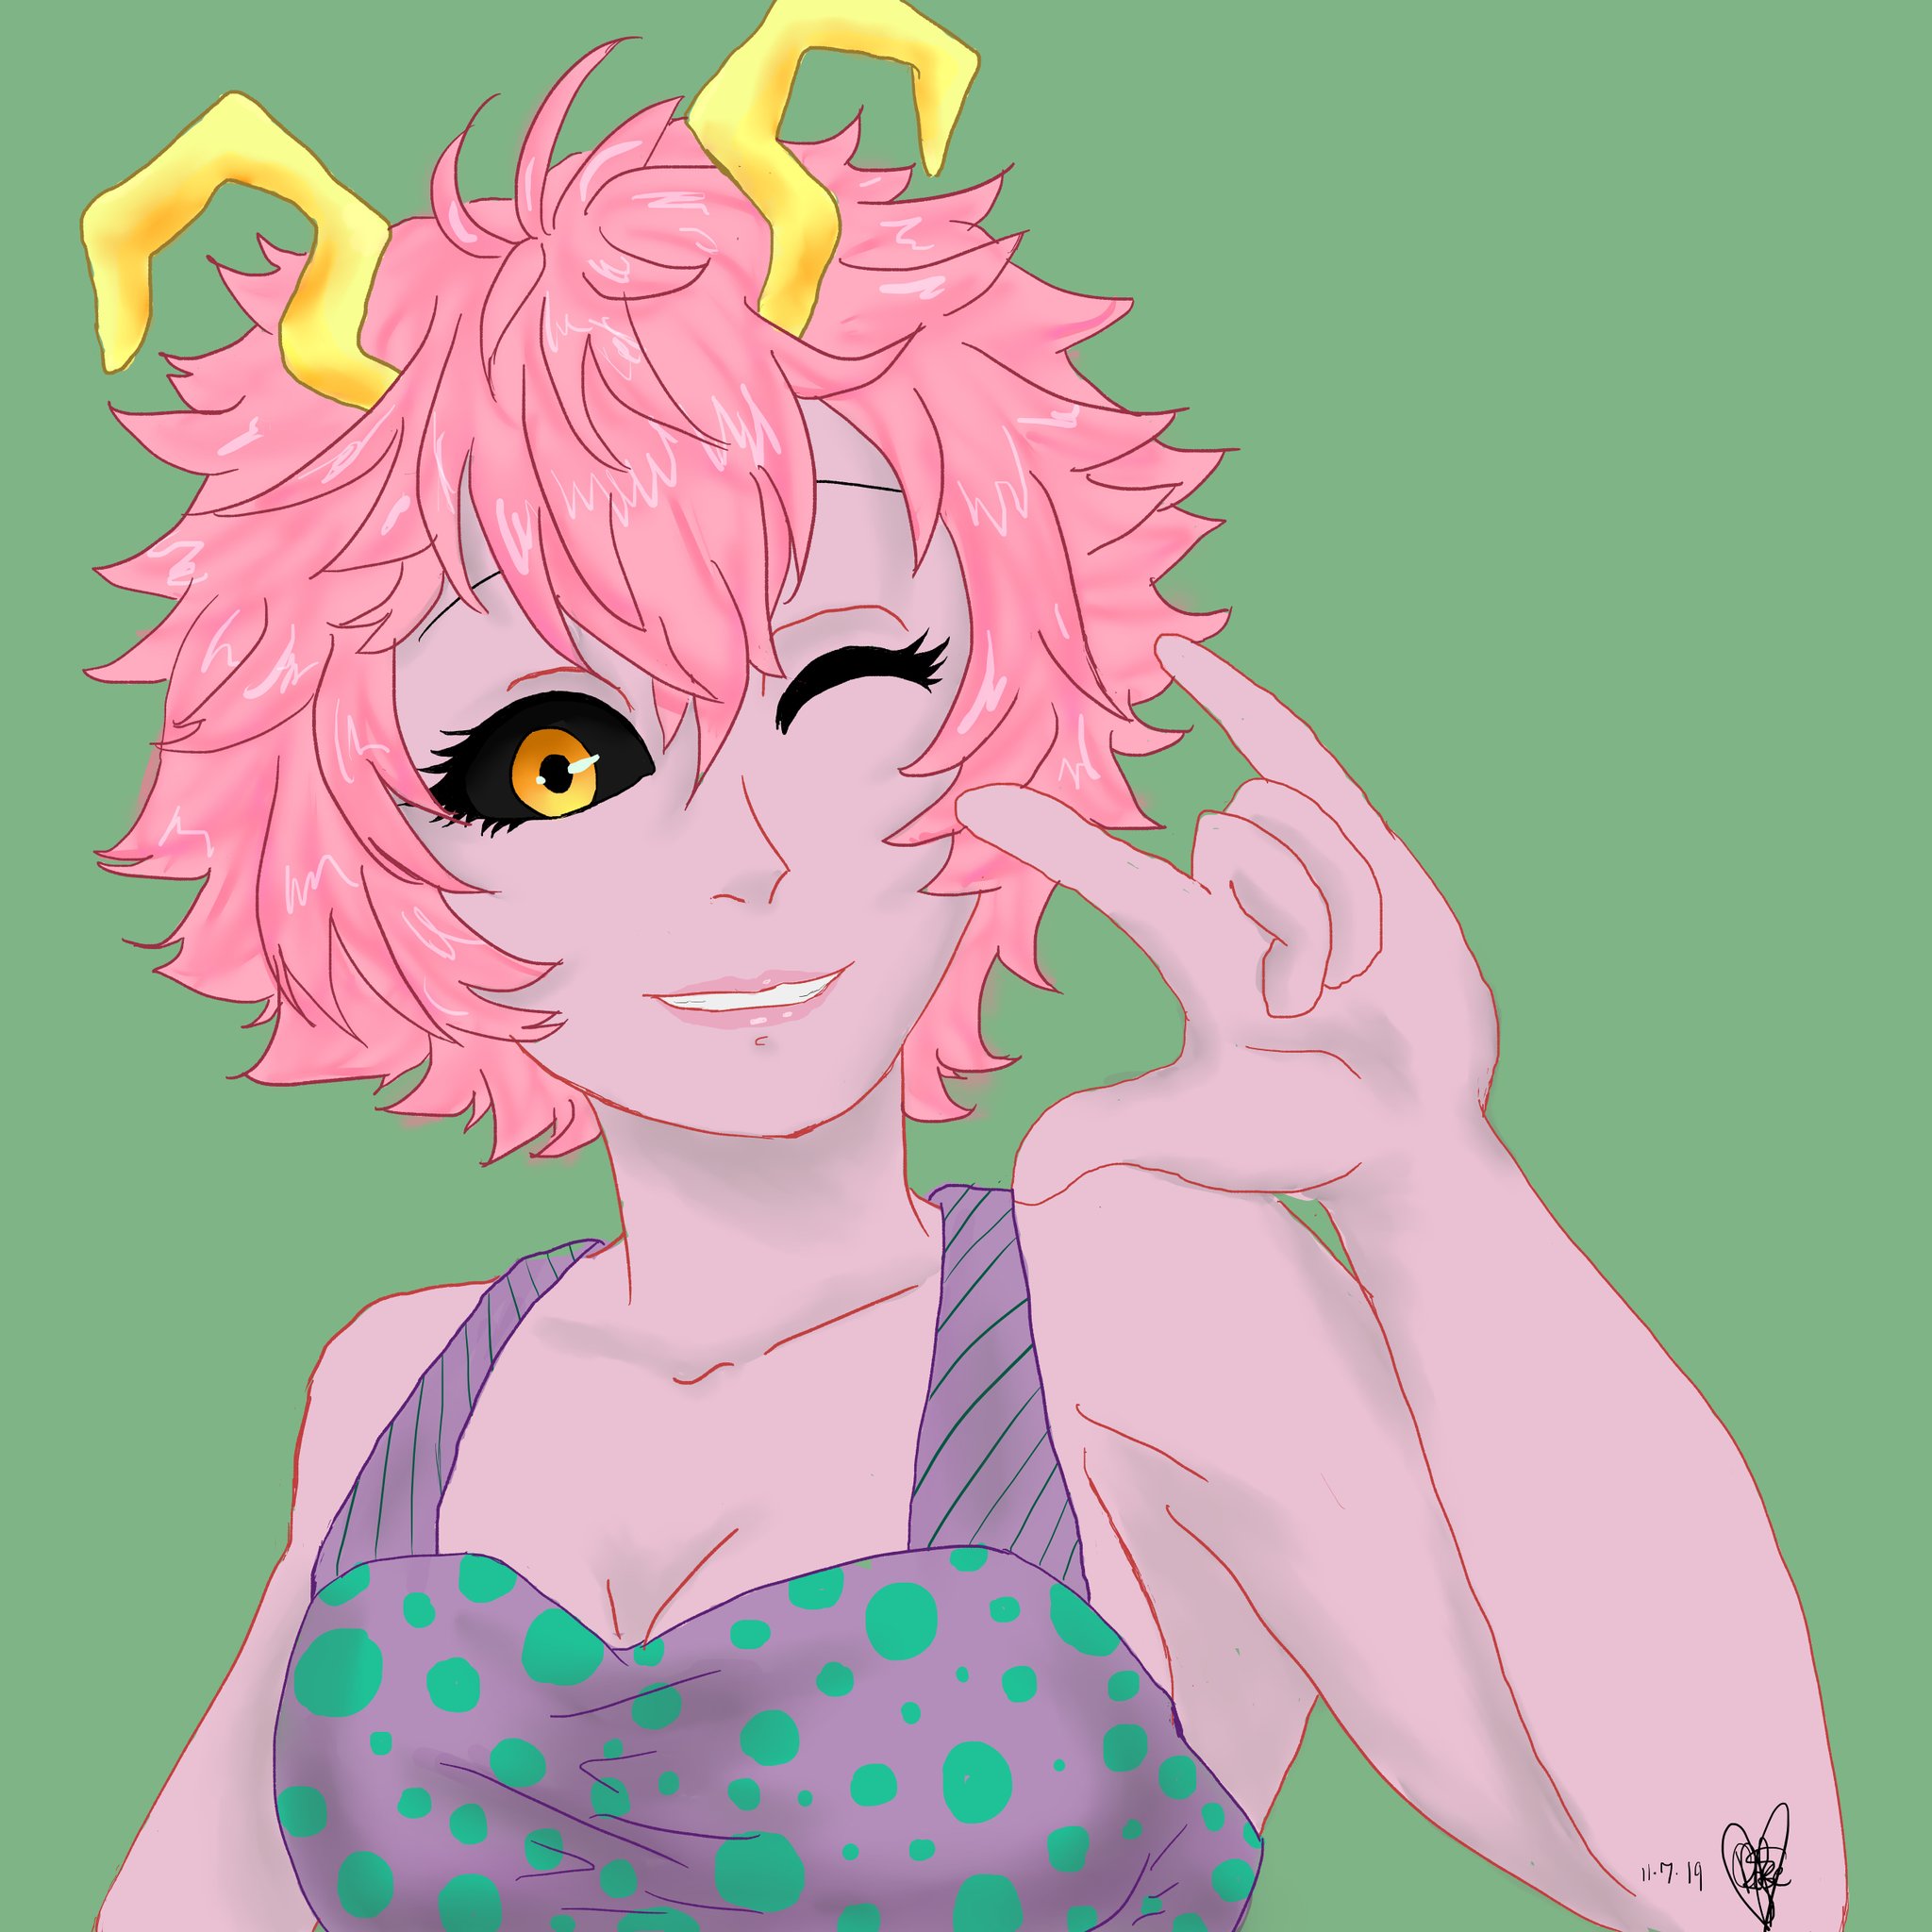 Art ☆ COMMISSIONS OPEN ☆ on Twitter: "Another lovely girl from class 1...